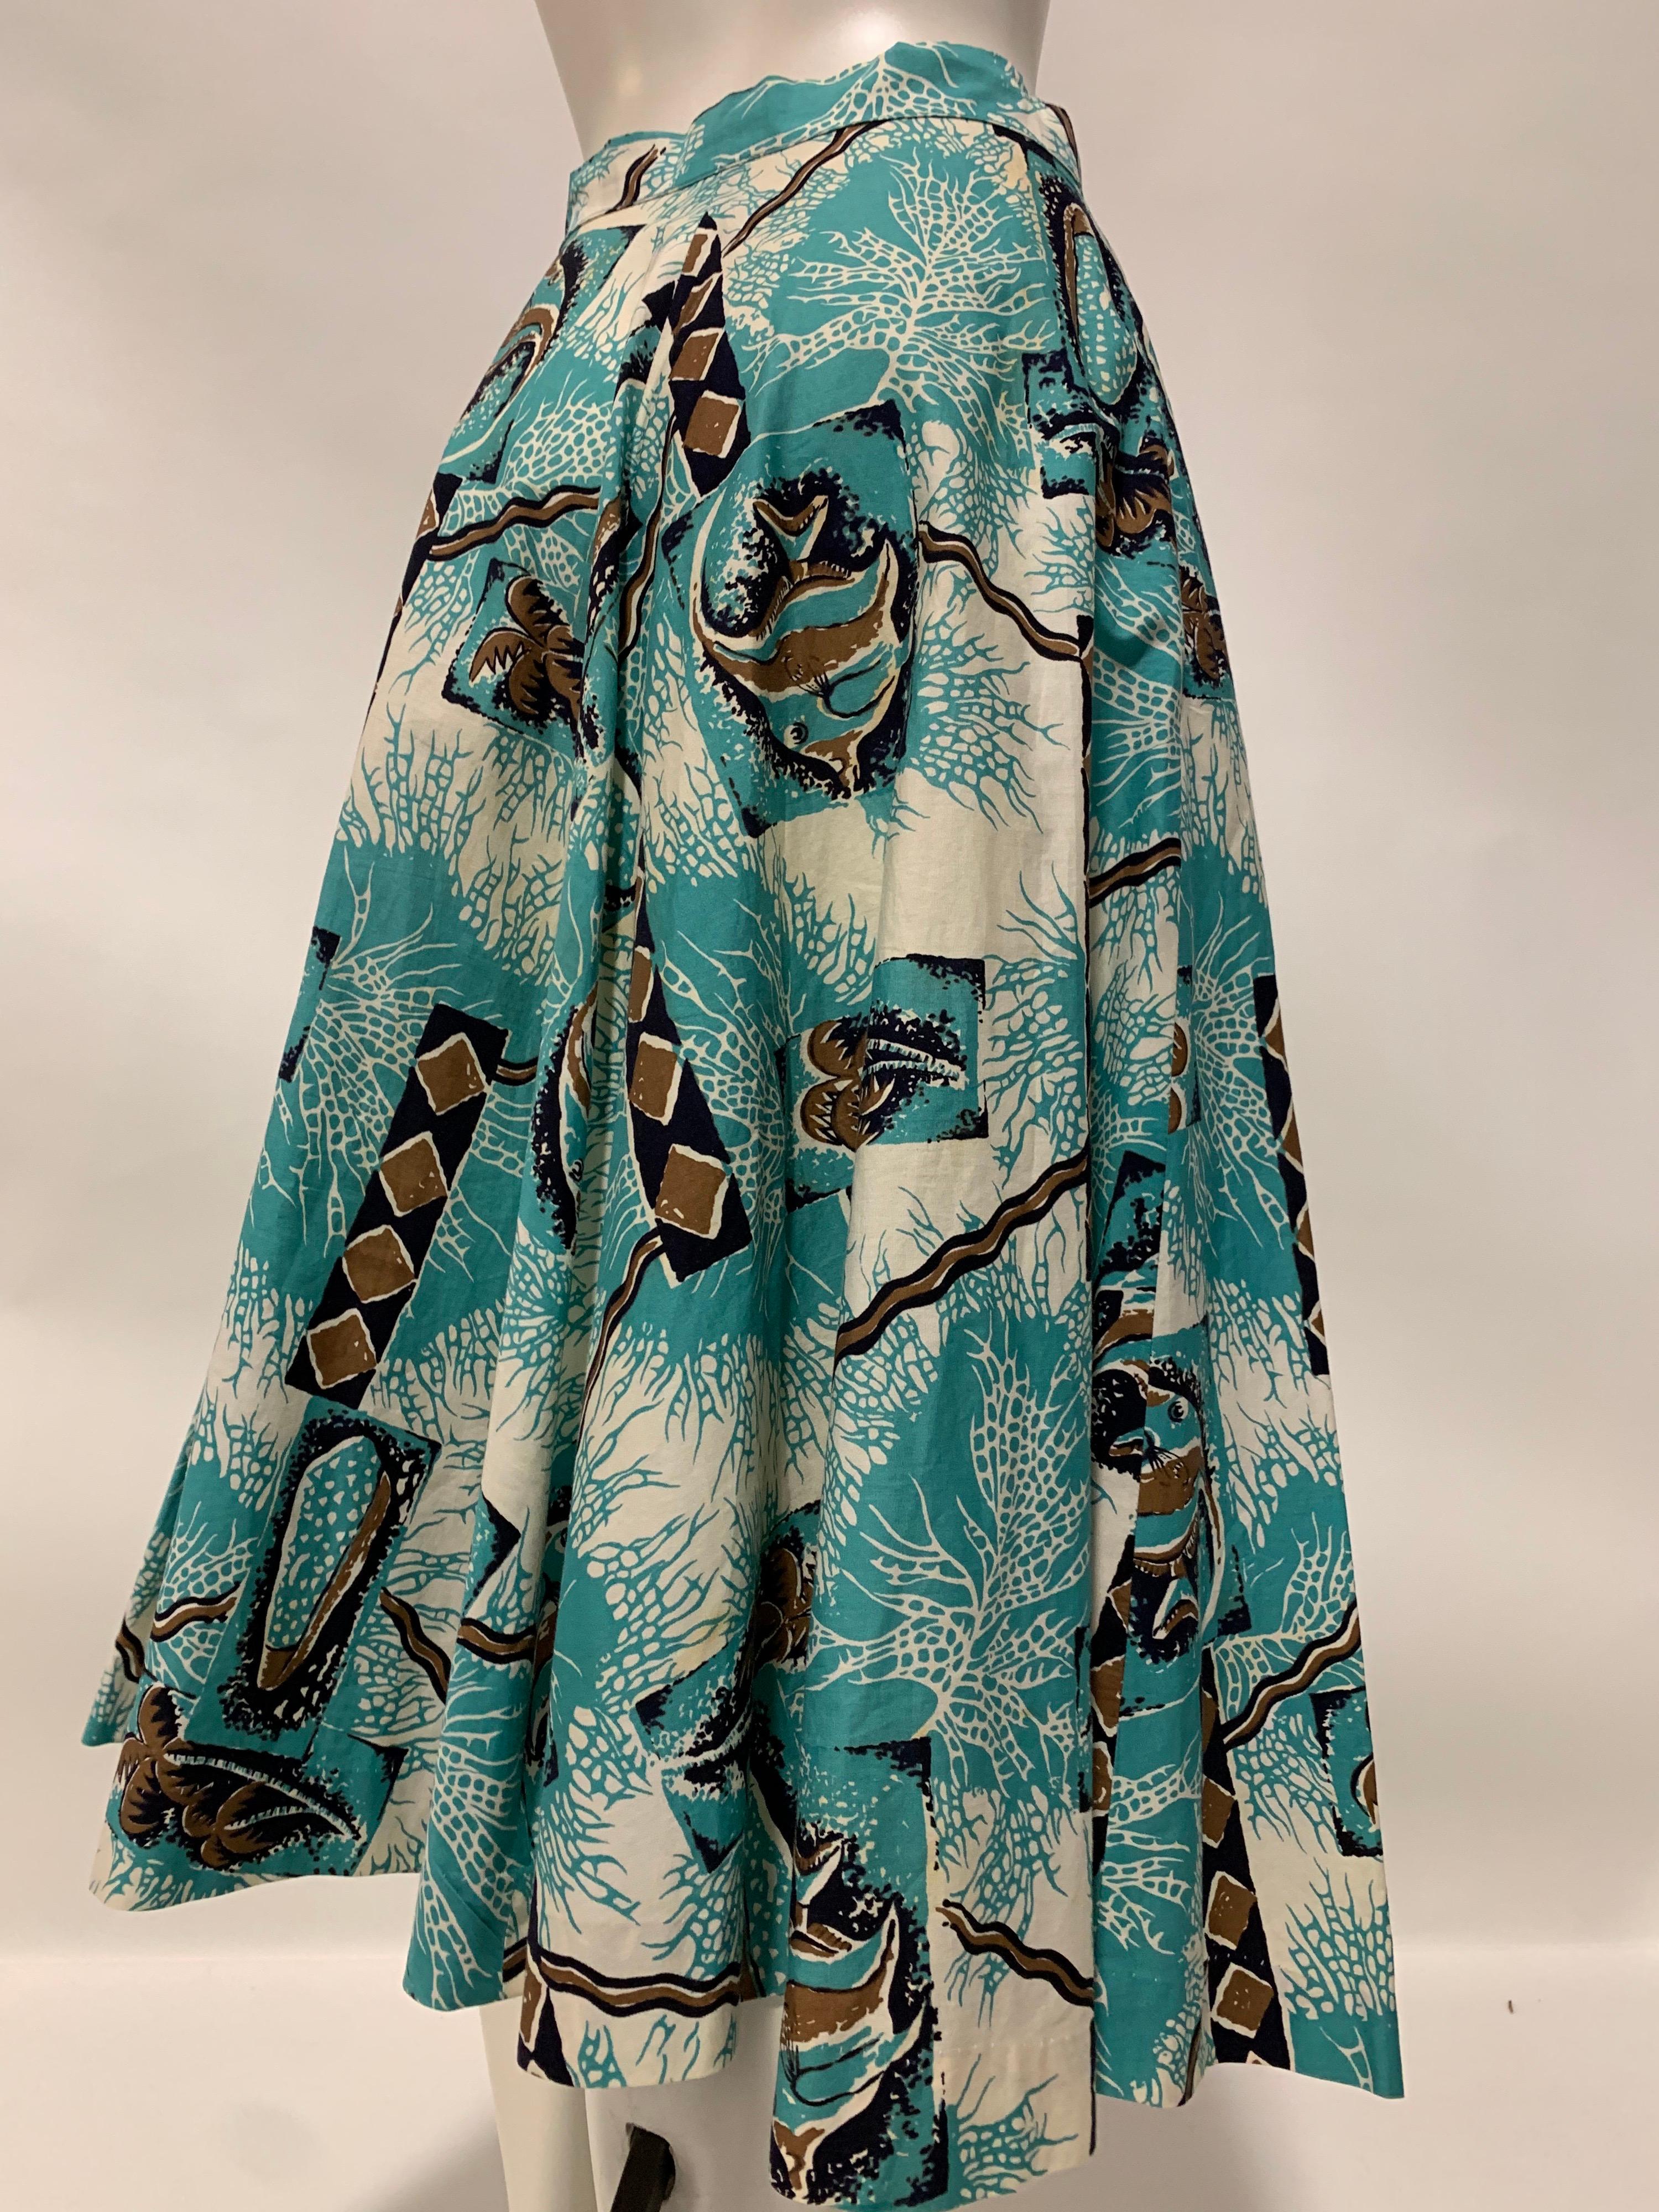 1940s Rare Alfred Shaheen Cotton Tropical Print Coconut Button Front Skirt  2